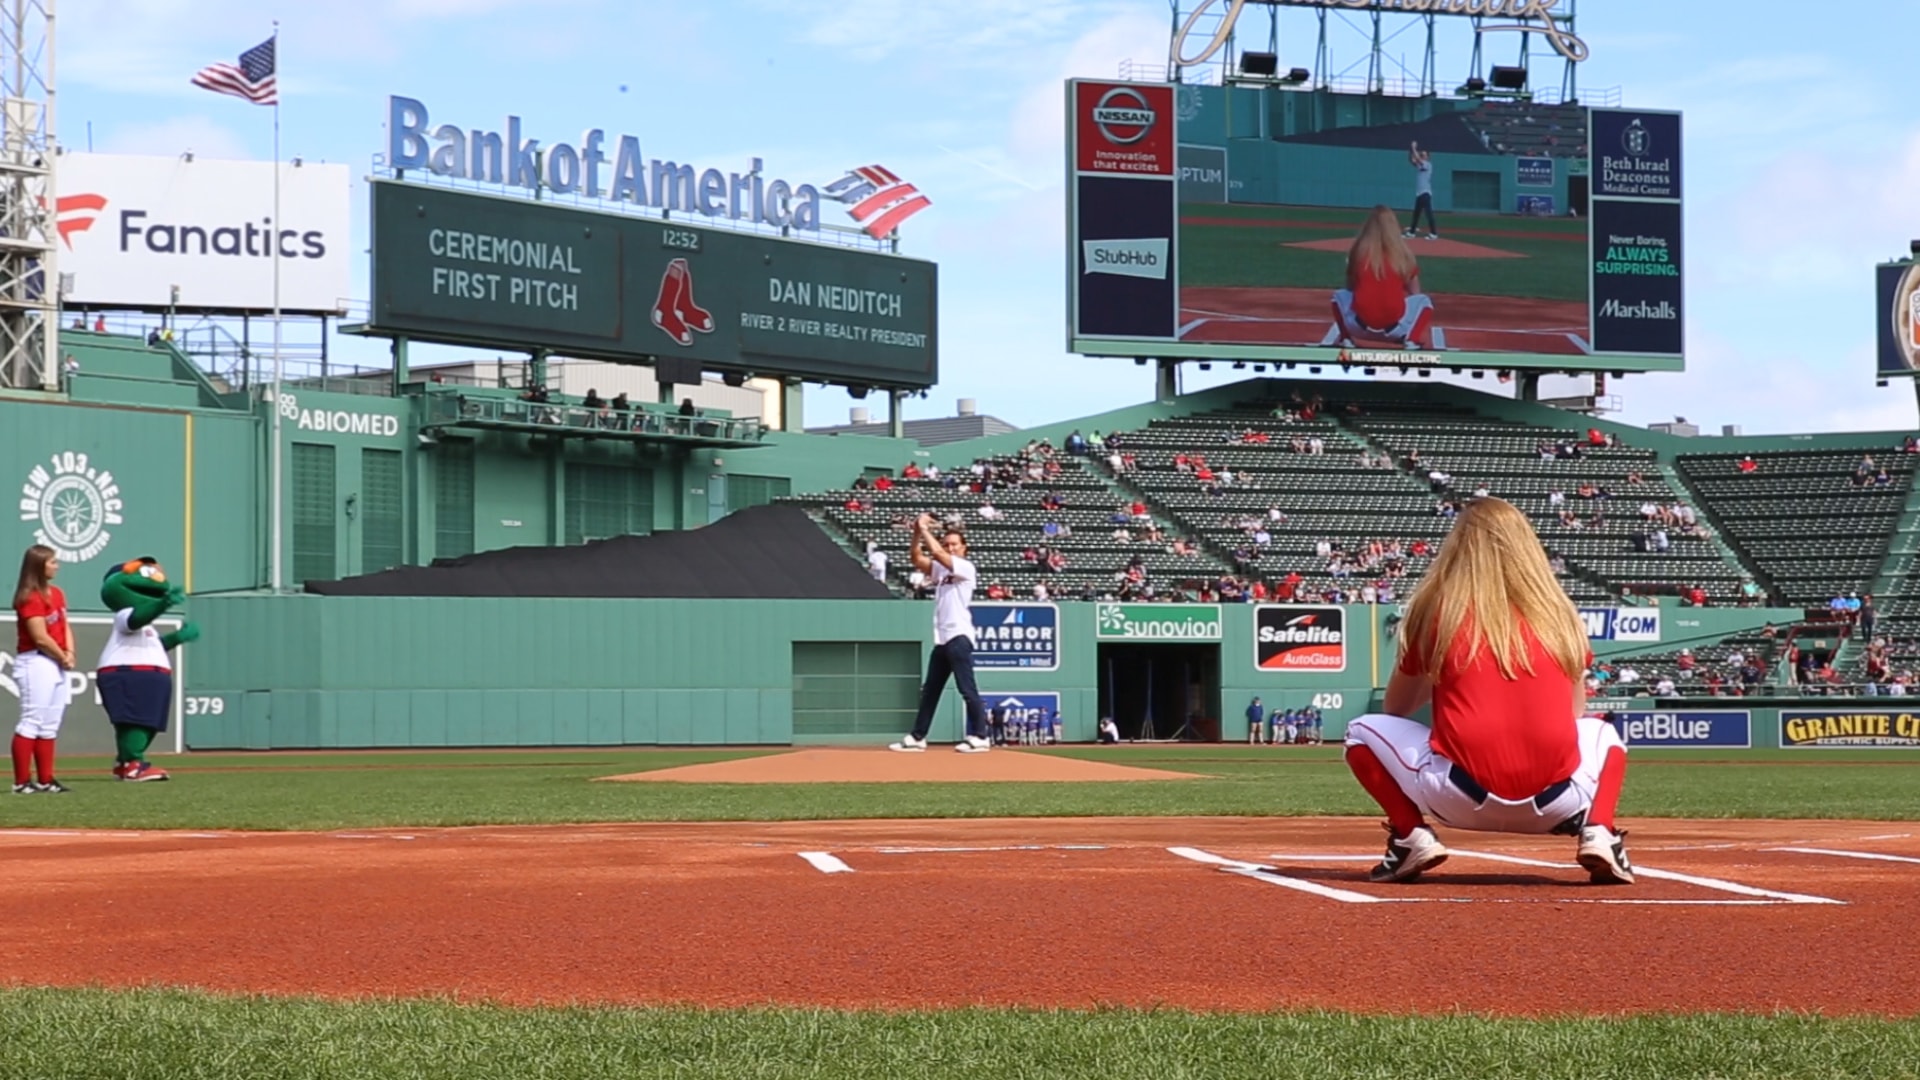 Daniel Neiditch Opening Pitch at Red Sox